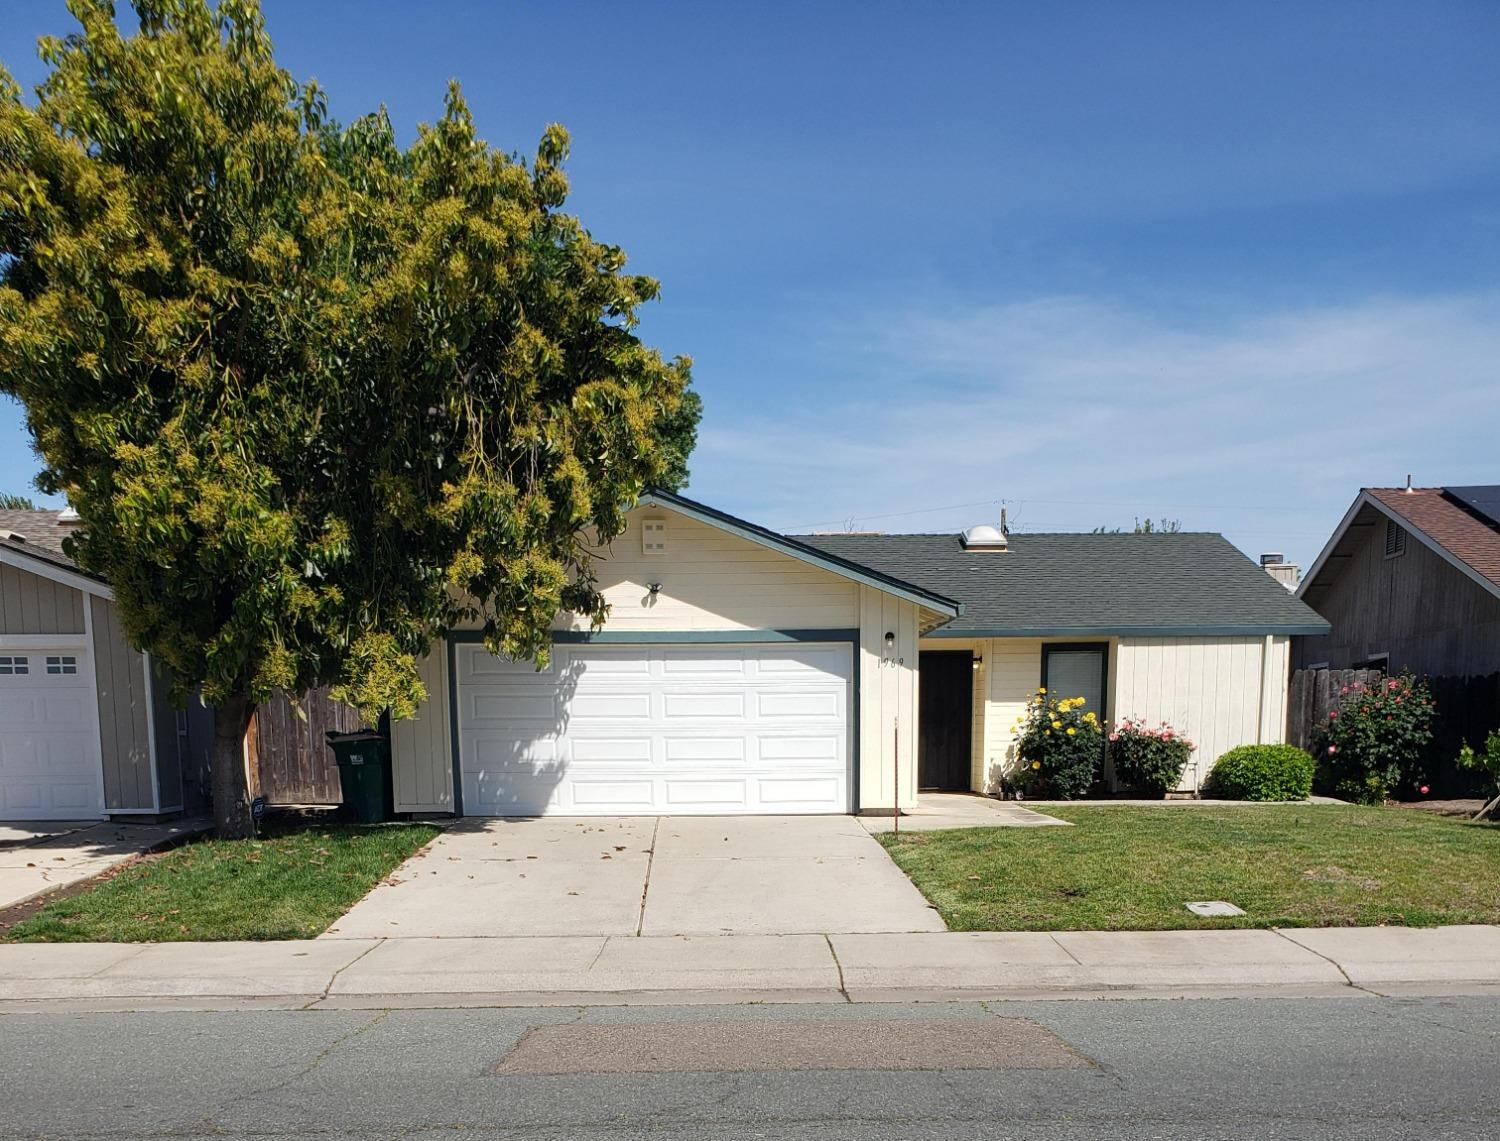 Photo of 1969 Pyrenees Ave in Stockton, CA